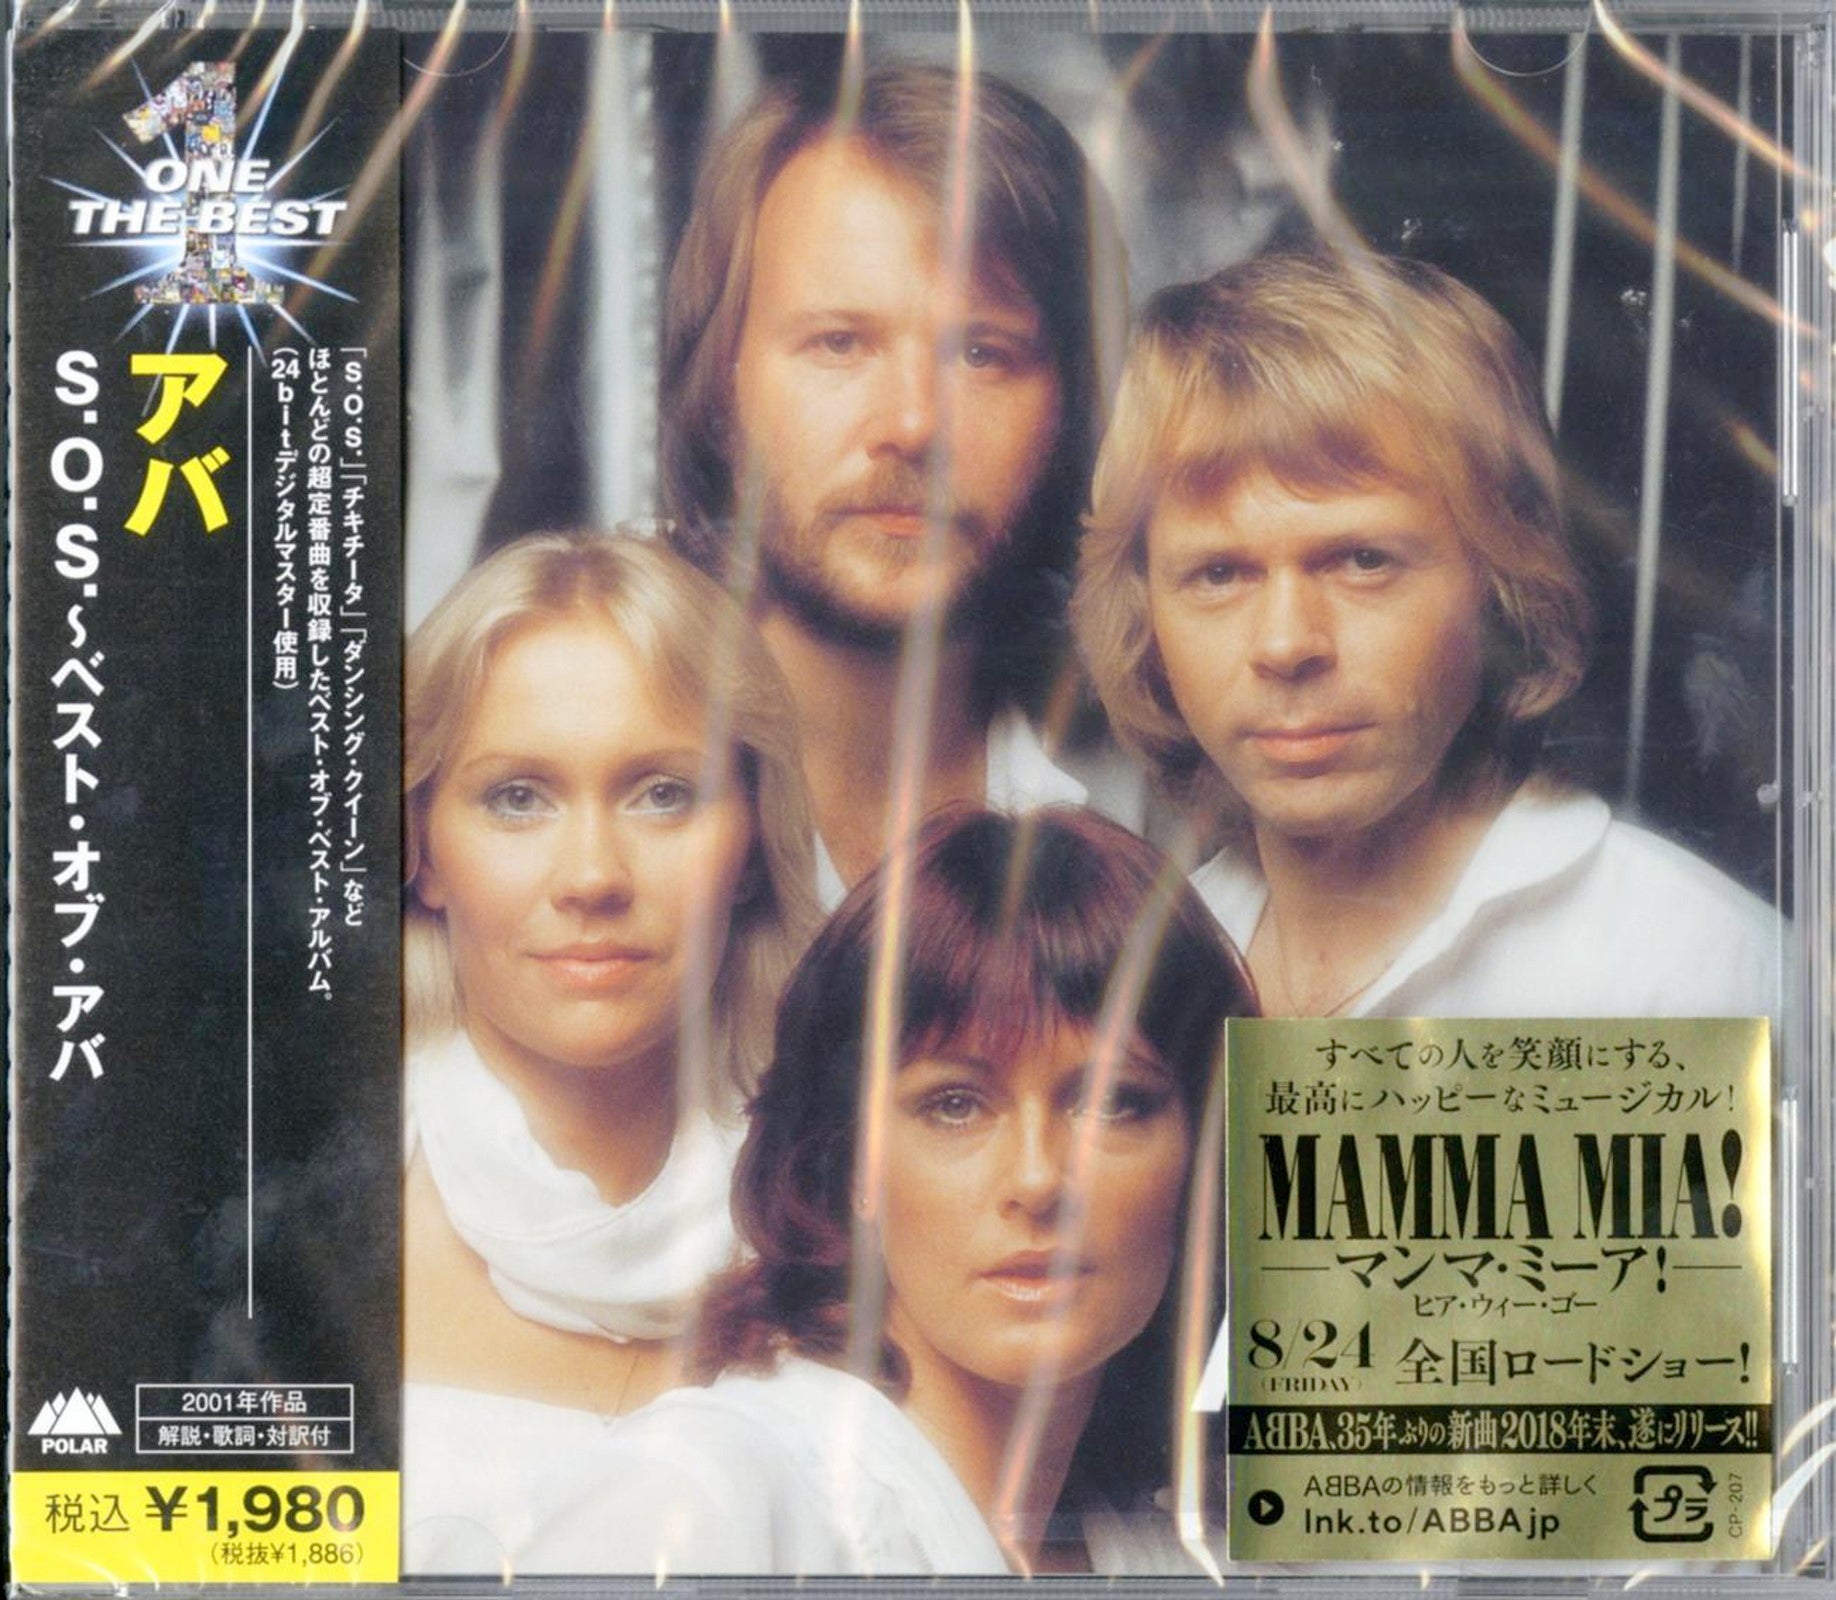 Abba - S.O.S. -The Best Of Abba- - Japan CD – CDs Vinyl Japan Store 2007